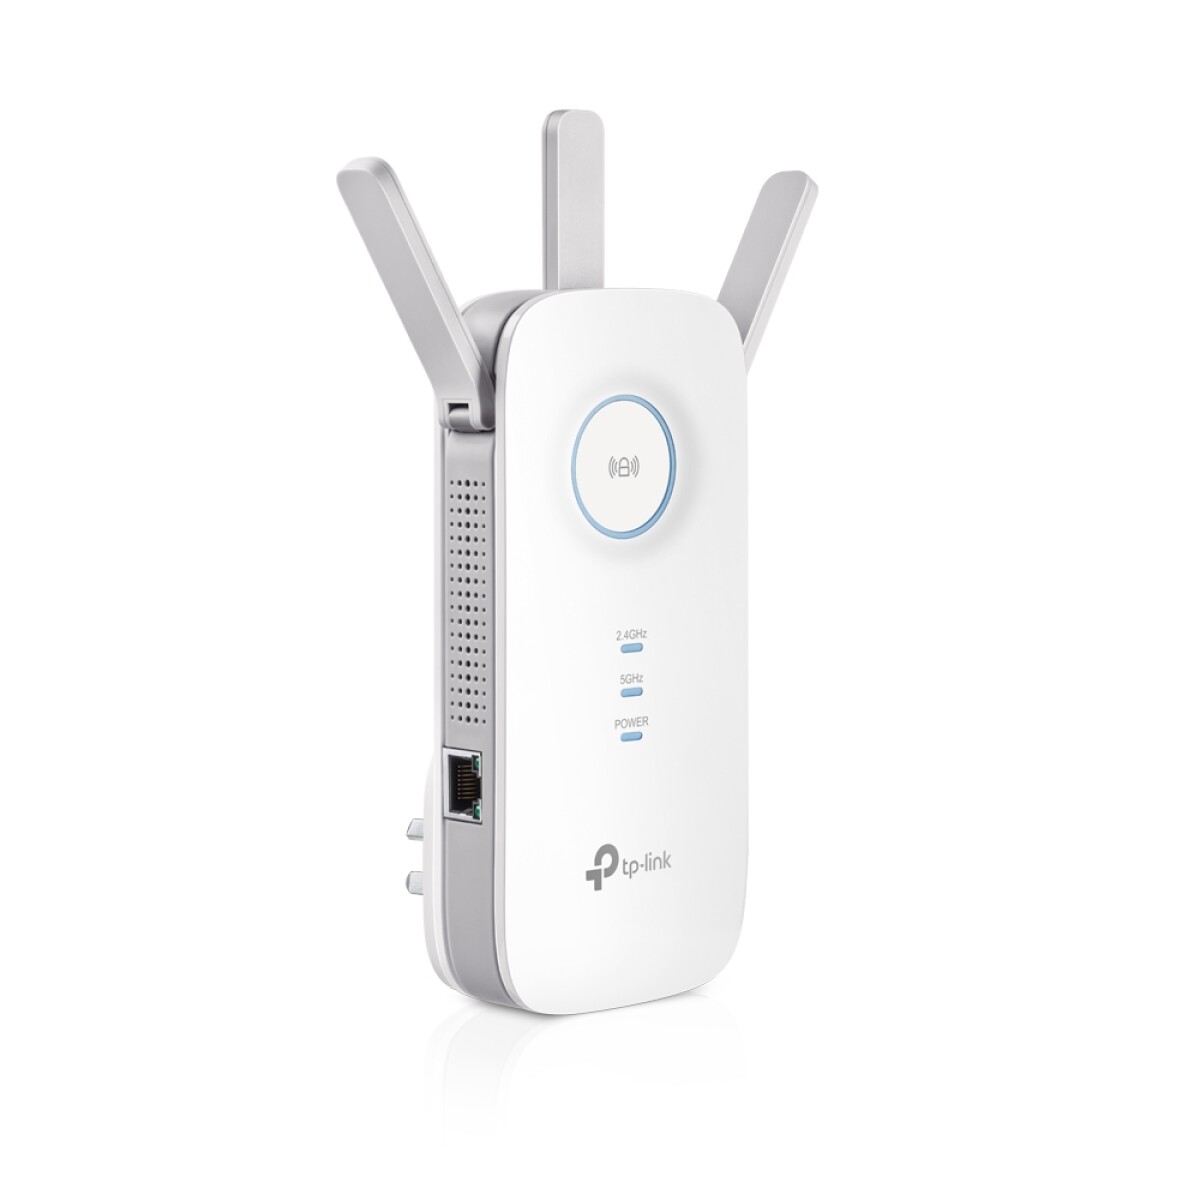 Access Point, Repetidor Tp-link Re450 Blanco - 3606 